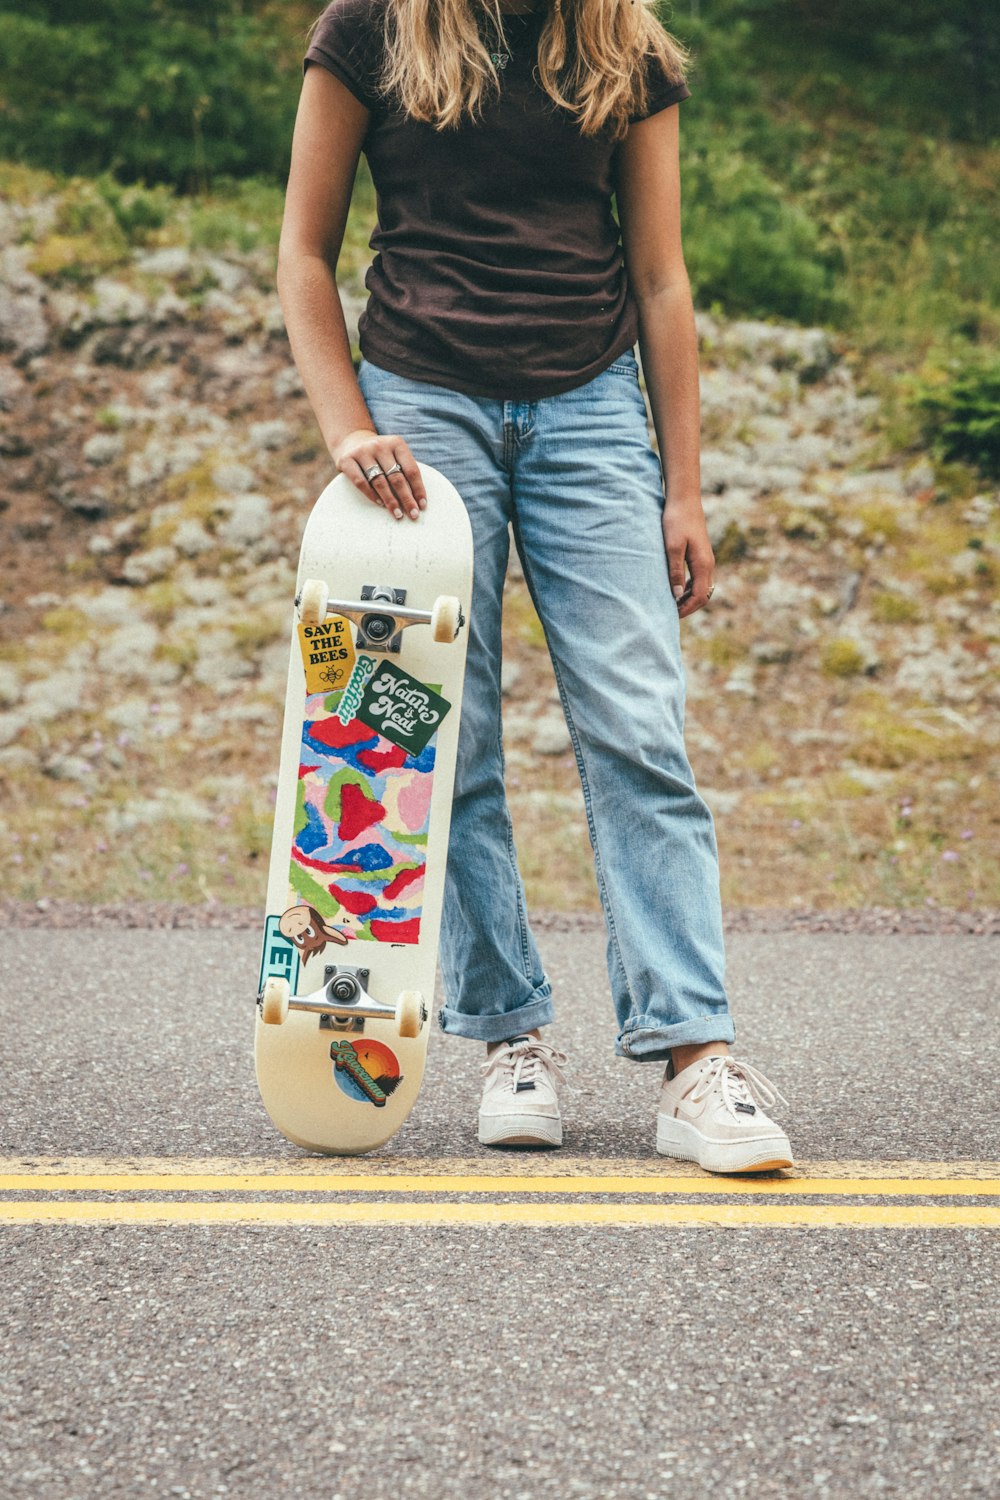 person in black tank top and blue denim jeans holding white and red skateboard